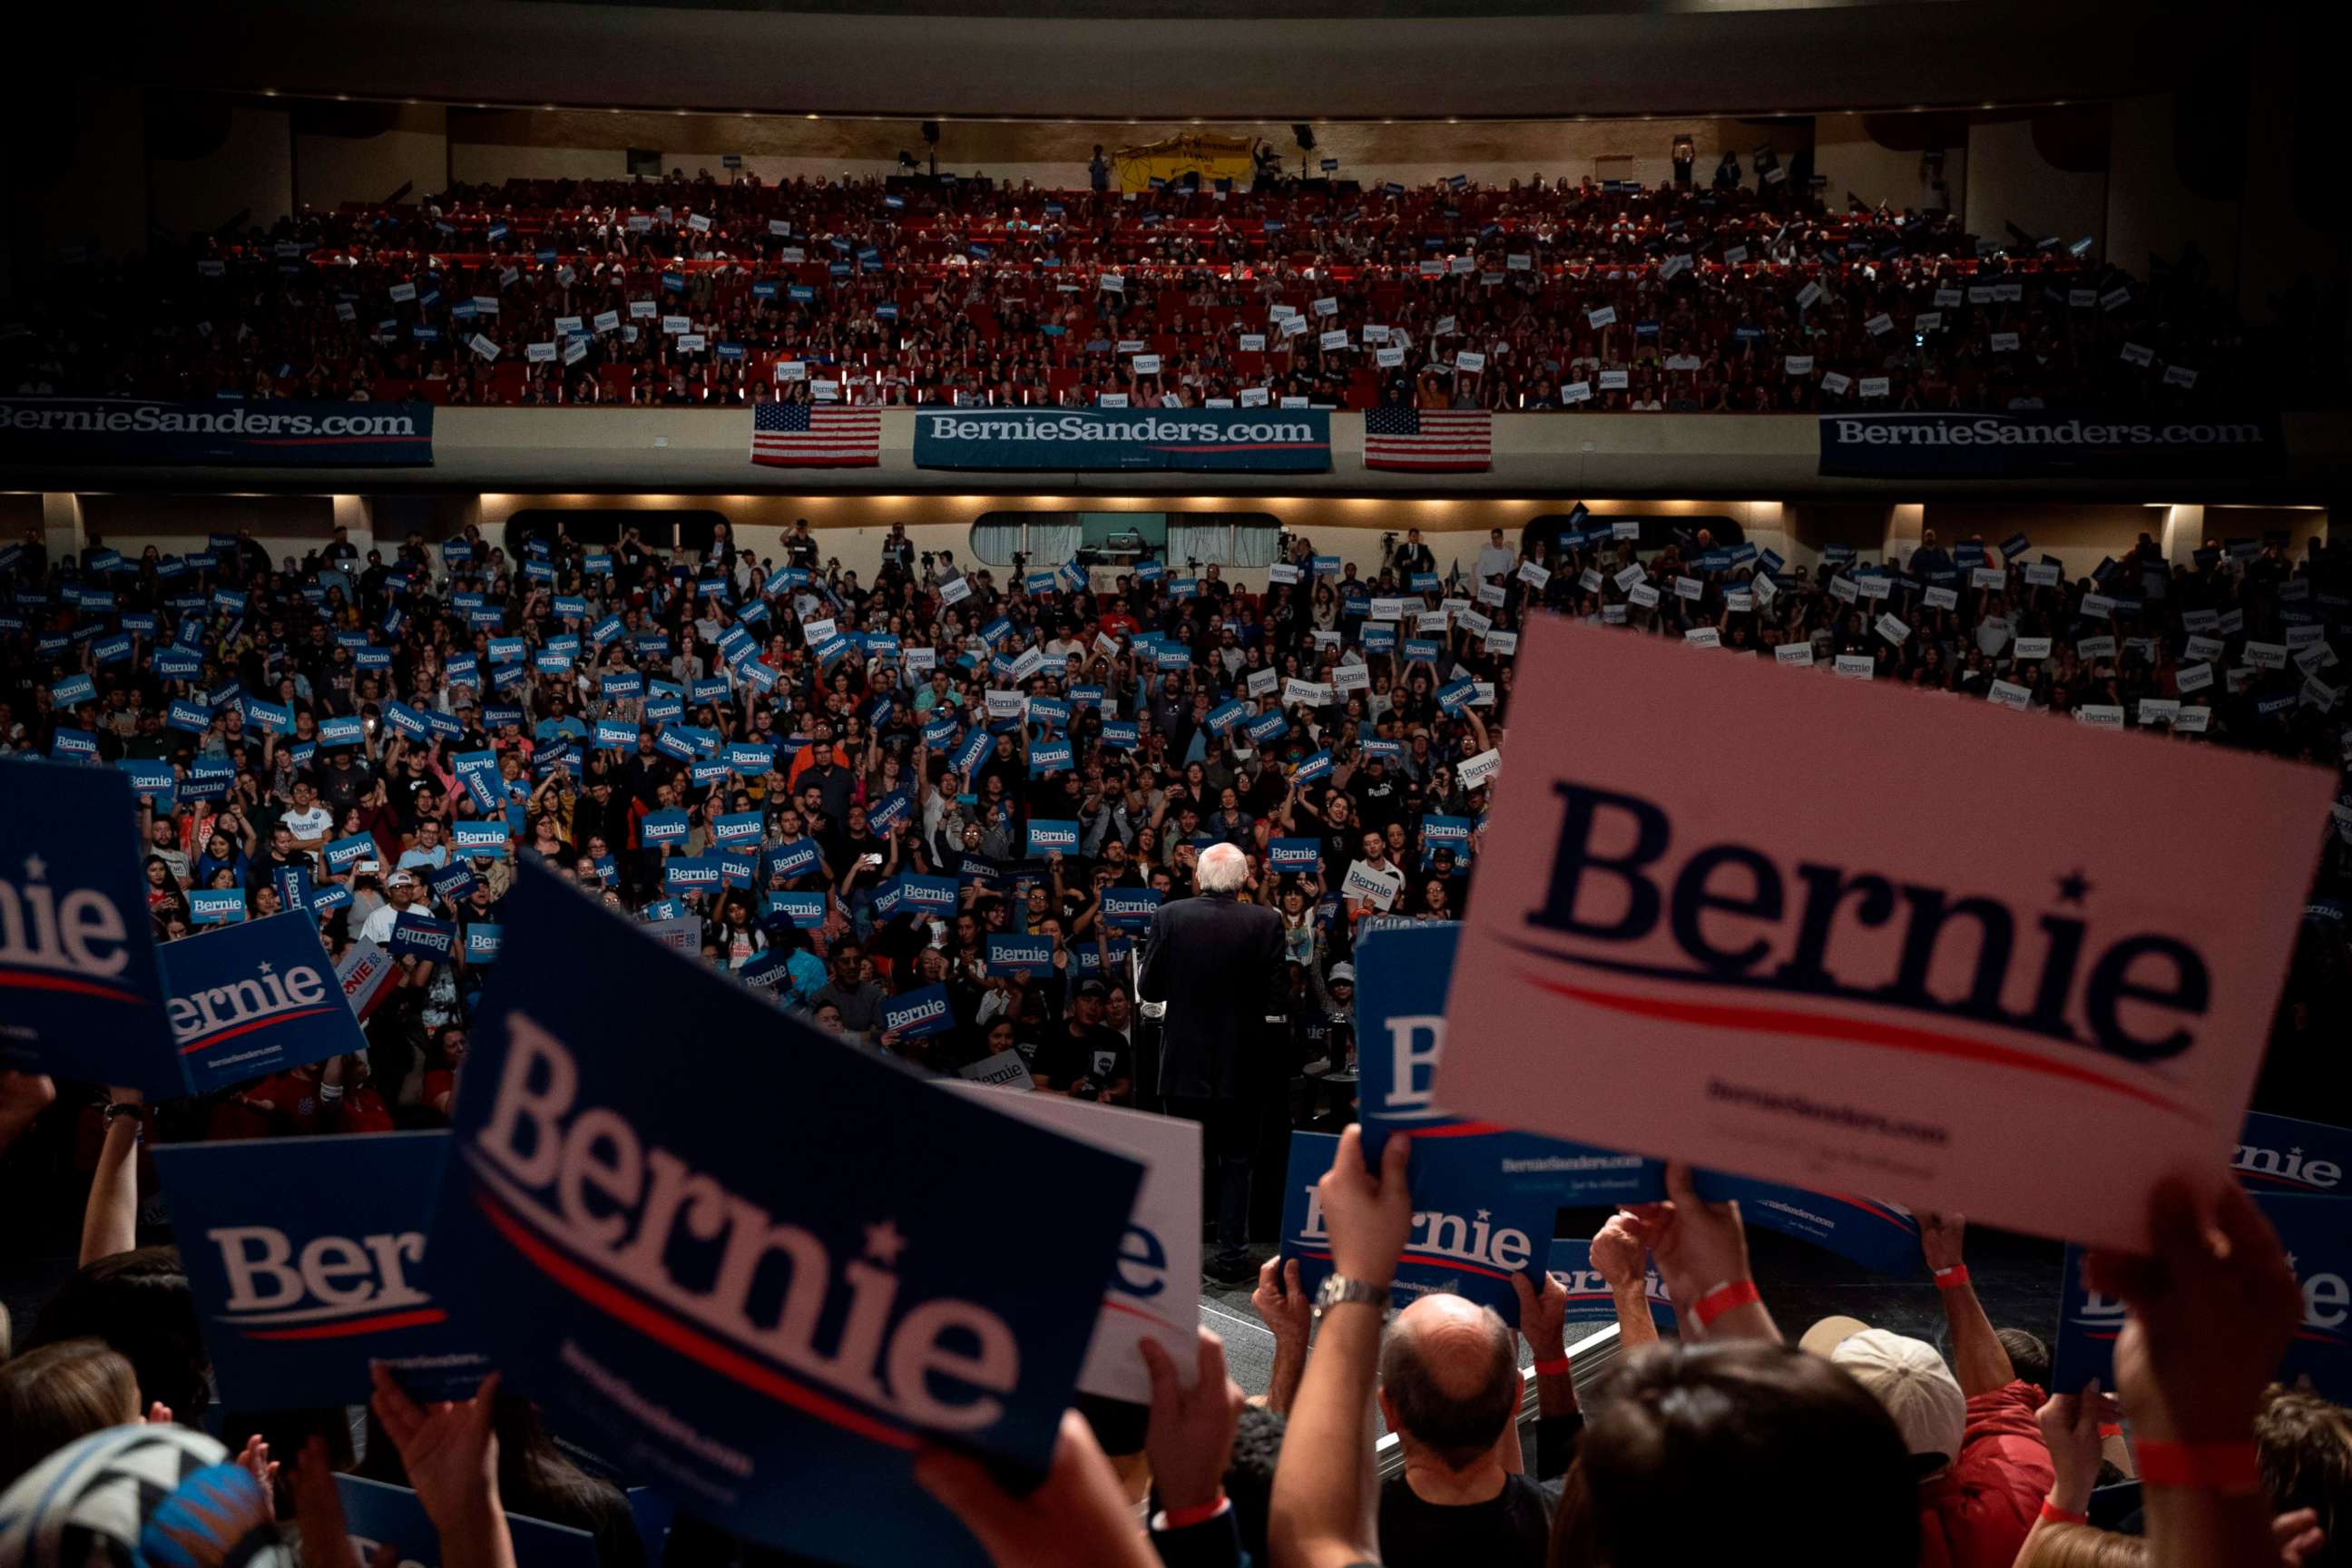 PHOTO: Democratic presidential hopeful Vermont Senator Bernie Sanders speaks during a rally at the Abraham Chavez Theater on February 22, 2020 in El Paso, Texas.